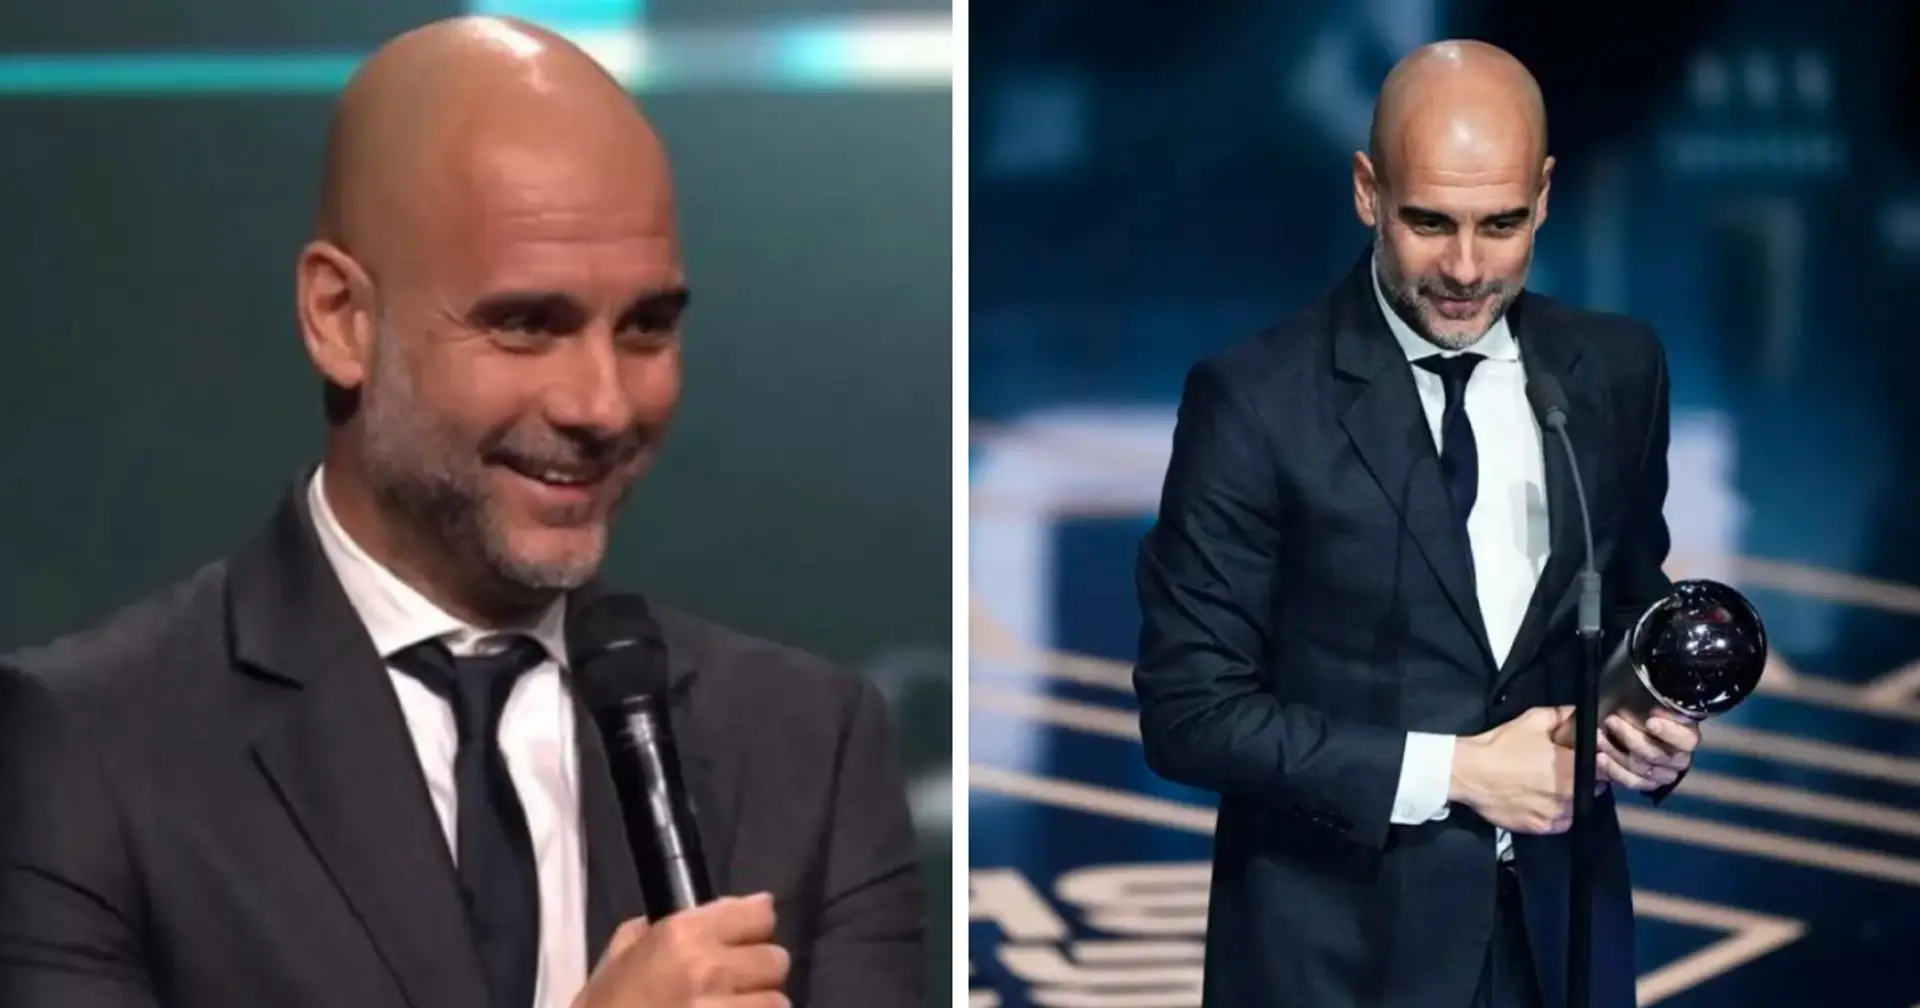 Pep Guardiola exclaims 'f***' at FIFA Best Awards in response to Thierry Henry's question